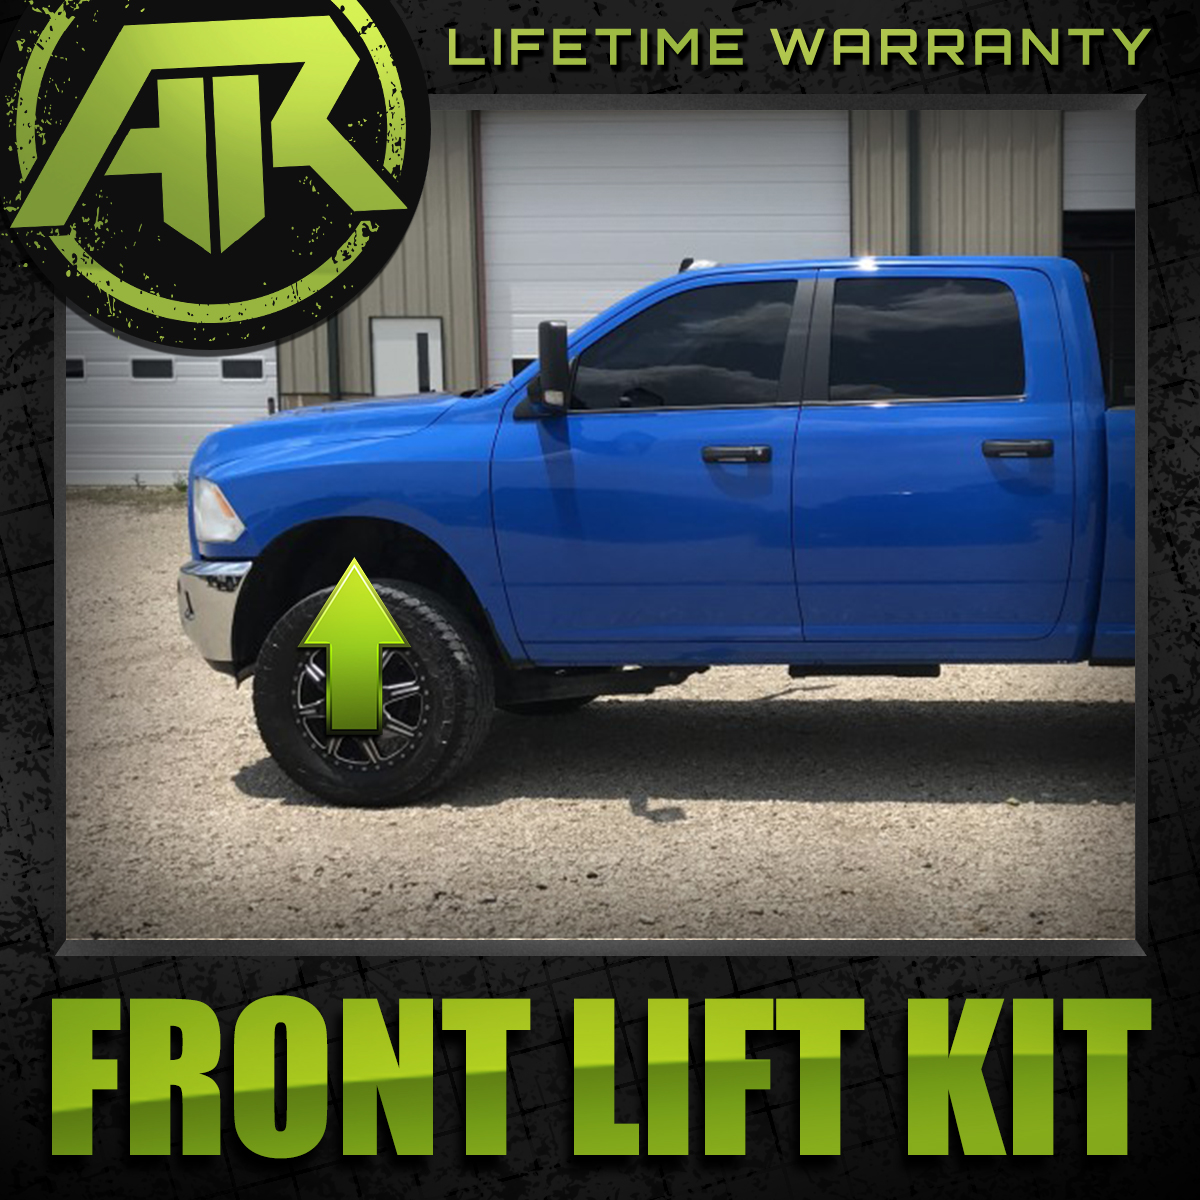 3.5" Lift Level Kit Fits 13-20 Dodge Ram 2500 3500 4WD / 2WD w/ Front 2018 Ram 2500 Leveling Kit Problems